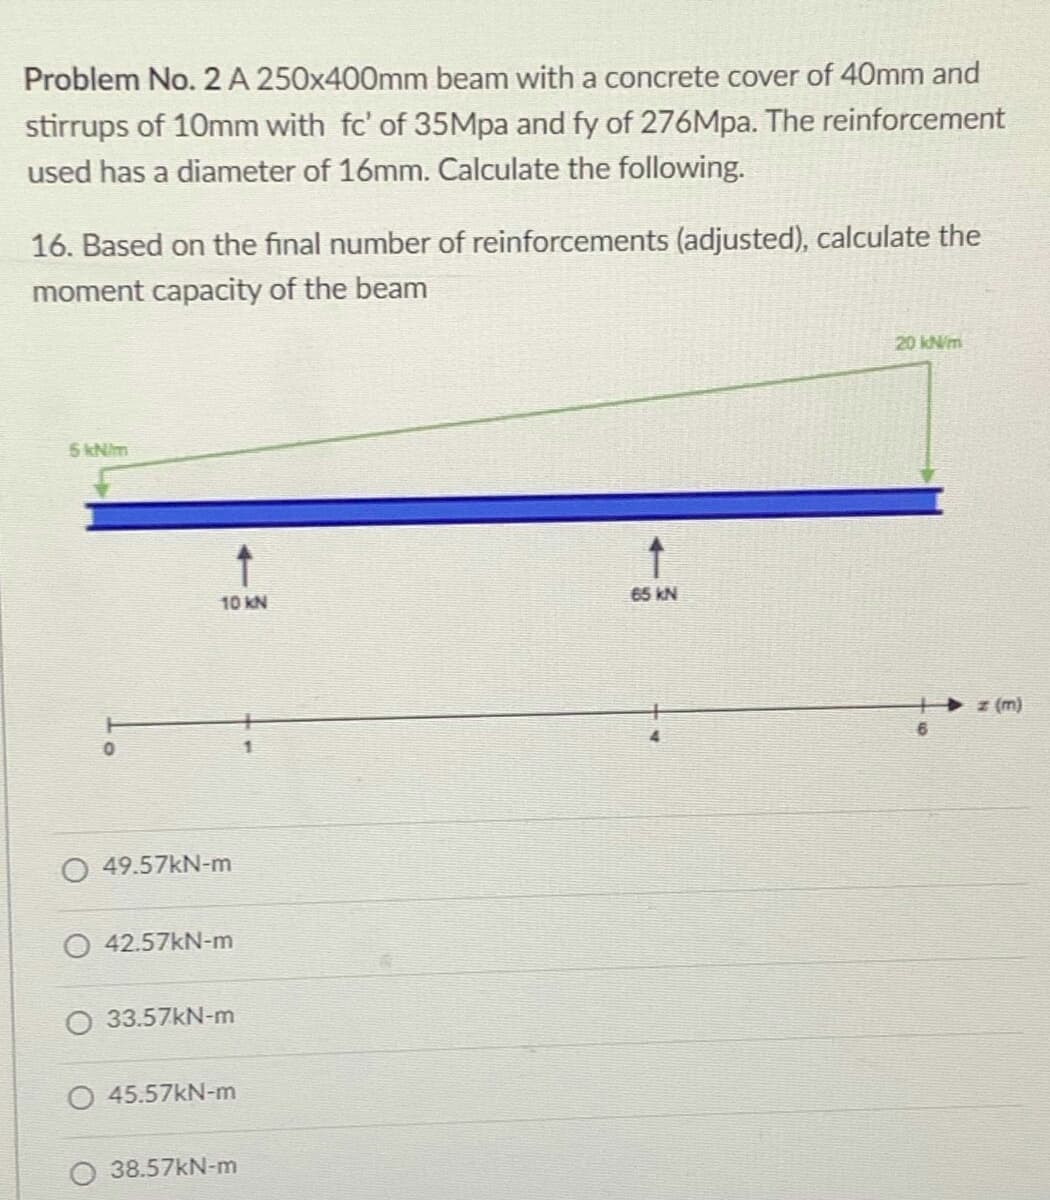 Problem No. 2 A 250x400mm beam with a concrete cover of 40mm and
stirrups of 10mm with fc' of 35Mpa and fy of 276Mpa. The reinforcement
used has a diameter of 16mm. Calculate the following.
16. Based on the final number of reinforcements (adjusted), calculate the
moment capacity of the beam
20 kN/m
5 kNim
65 kN
10 KN
z (m)
O 49.57KN-m
O 42.57kN-m
O 33.57KN-m
45.57kN-m
O 38.57kN-m
